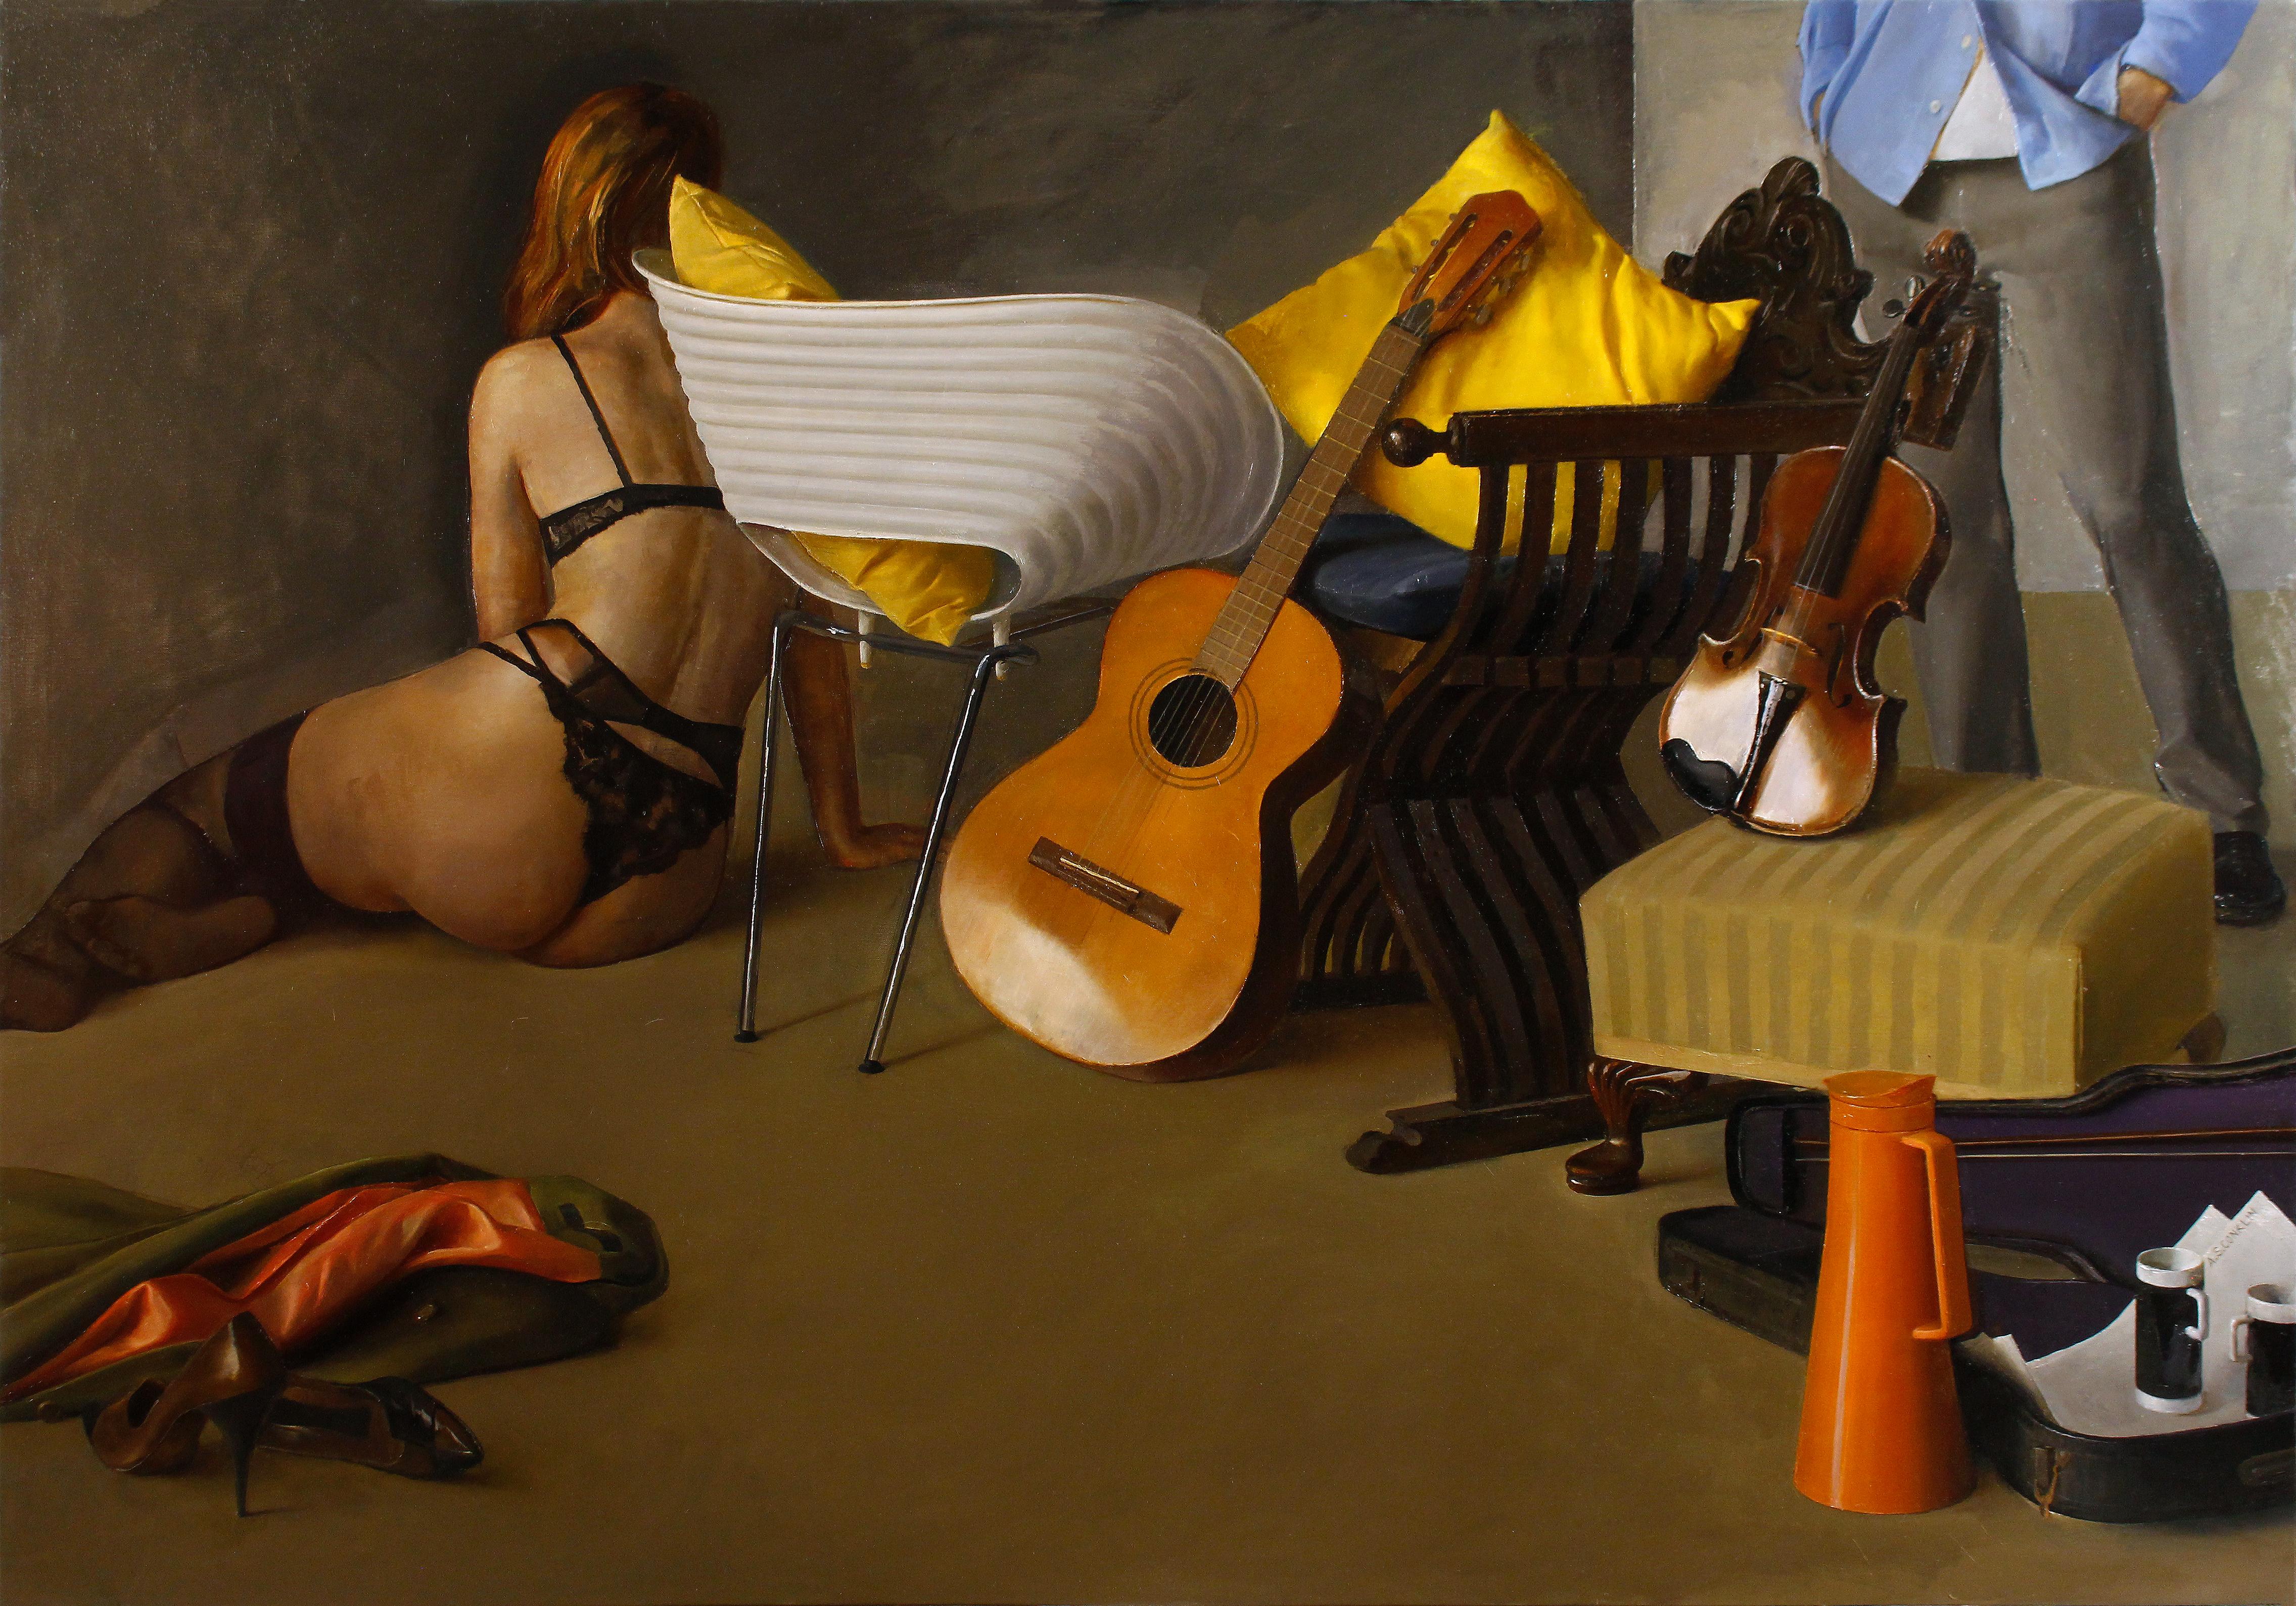 Duet II - Still Life with Guitar, Violin and Scantily Clad Woman, Oil on Linen